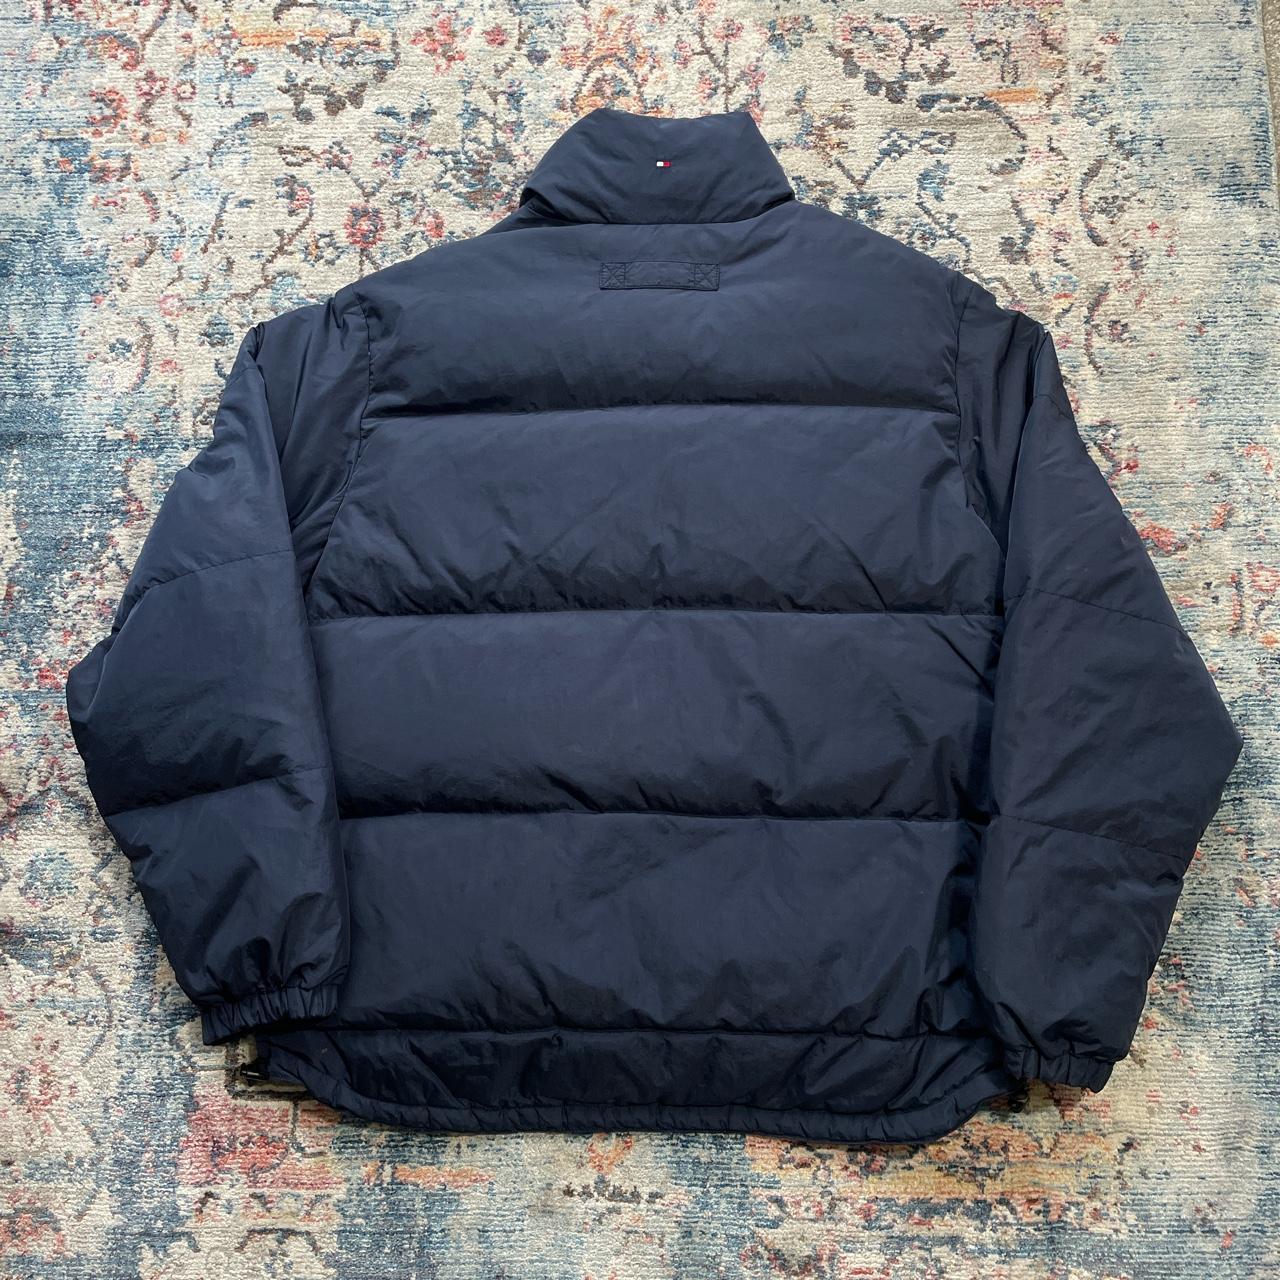 Vintage Tommy Hilfiger Navy and Cream Puffer Jacket